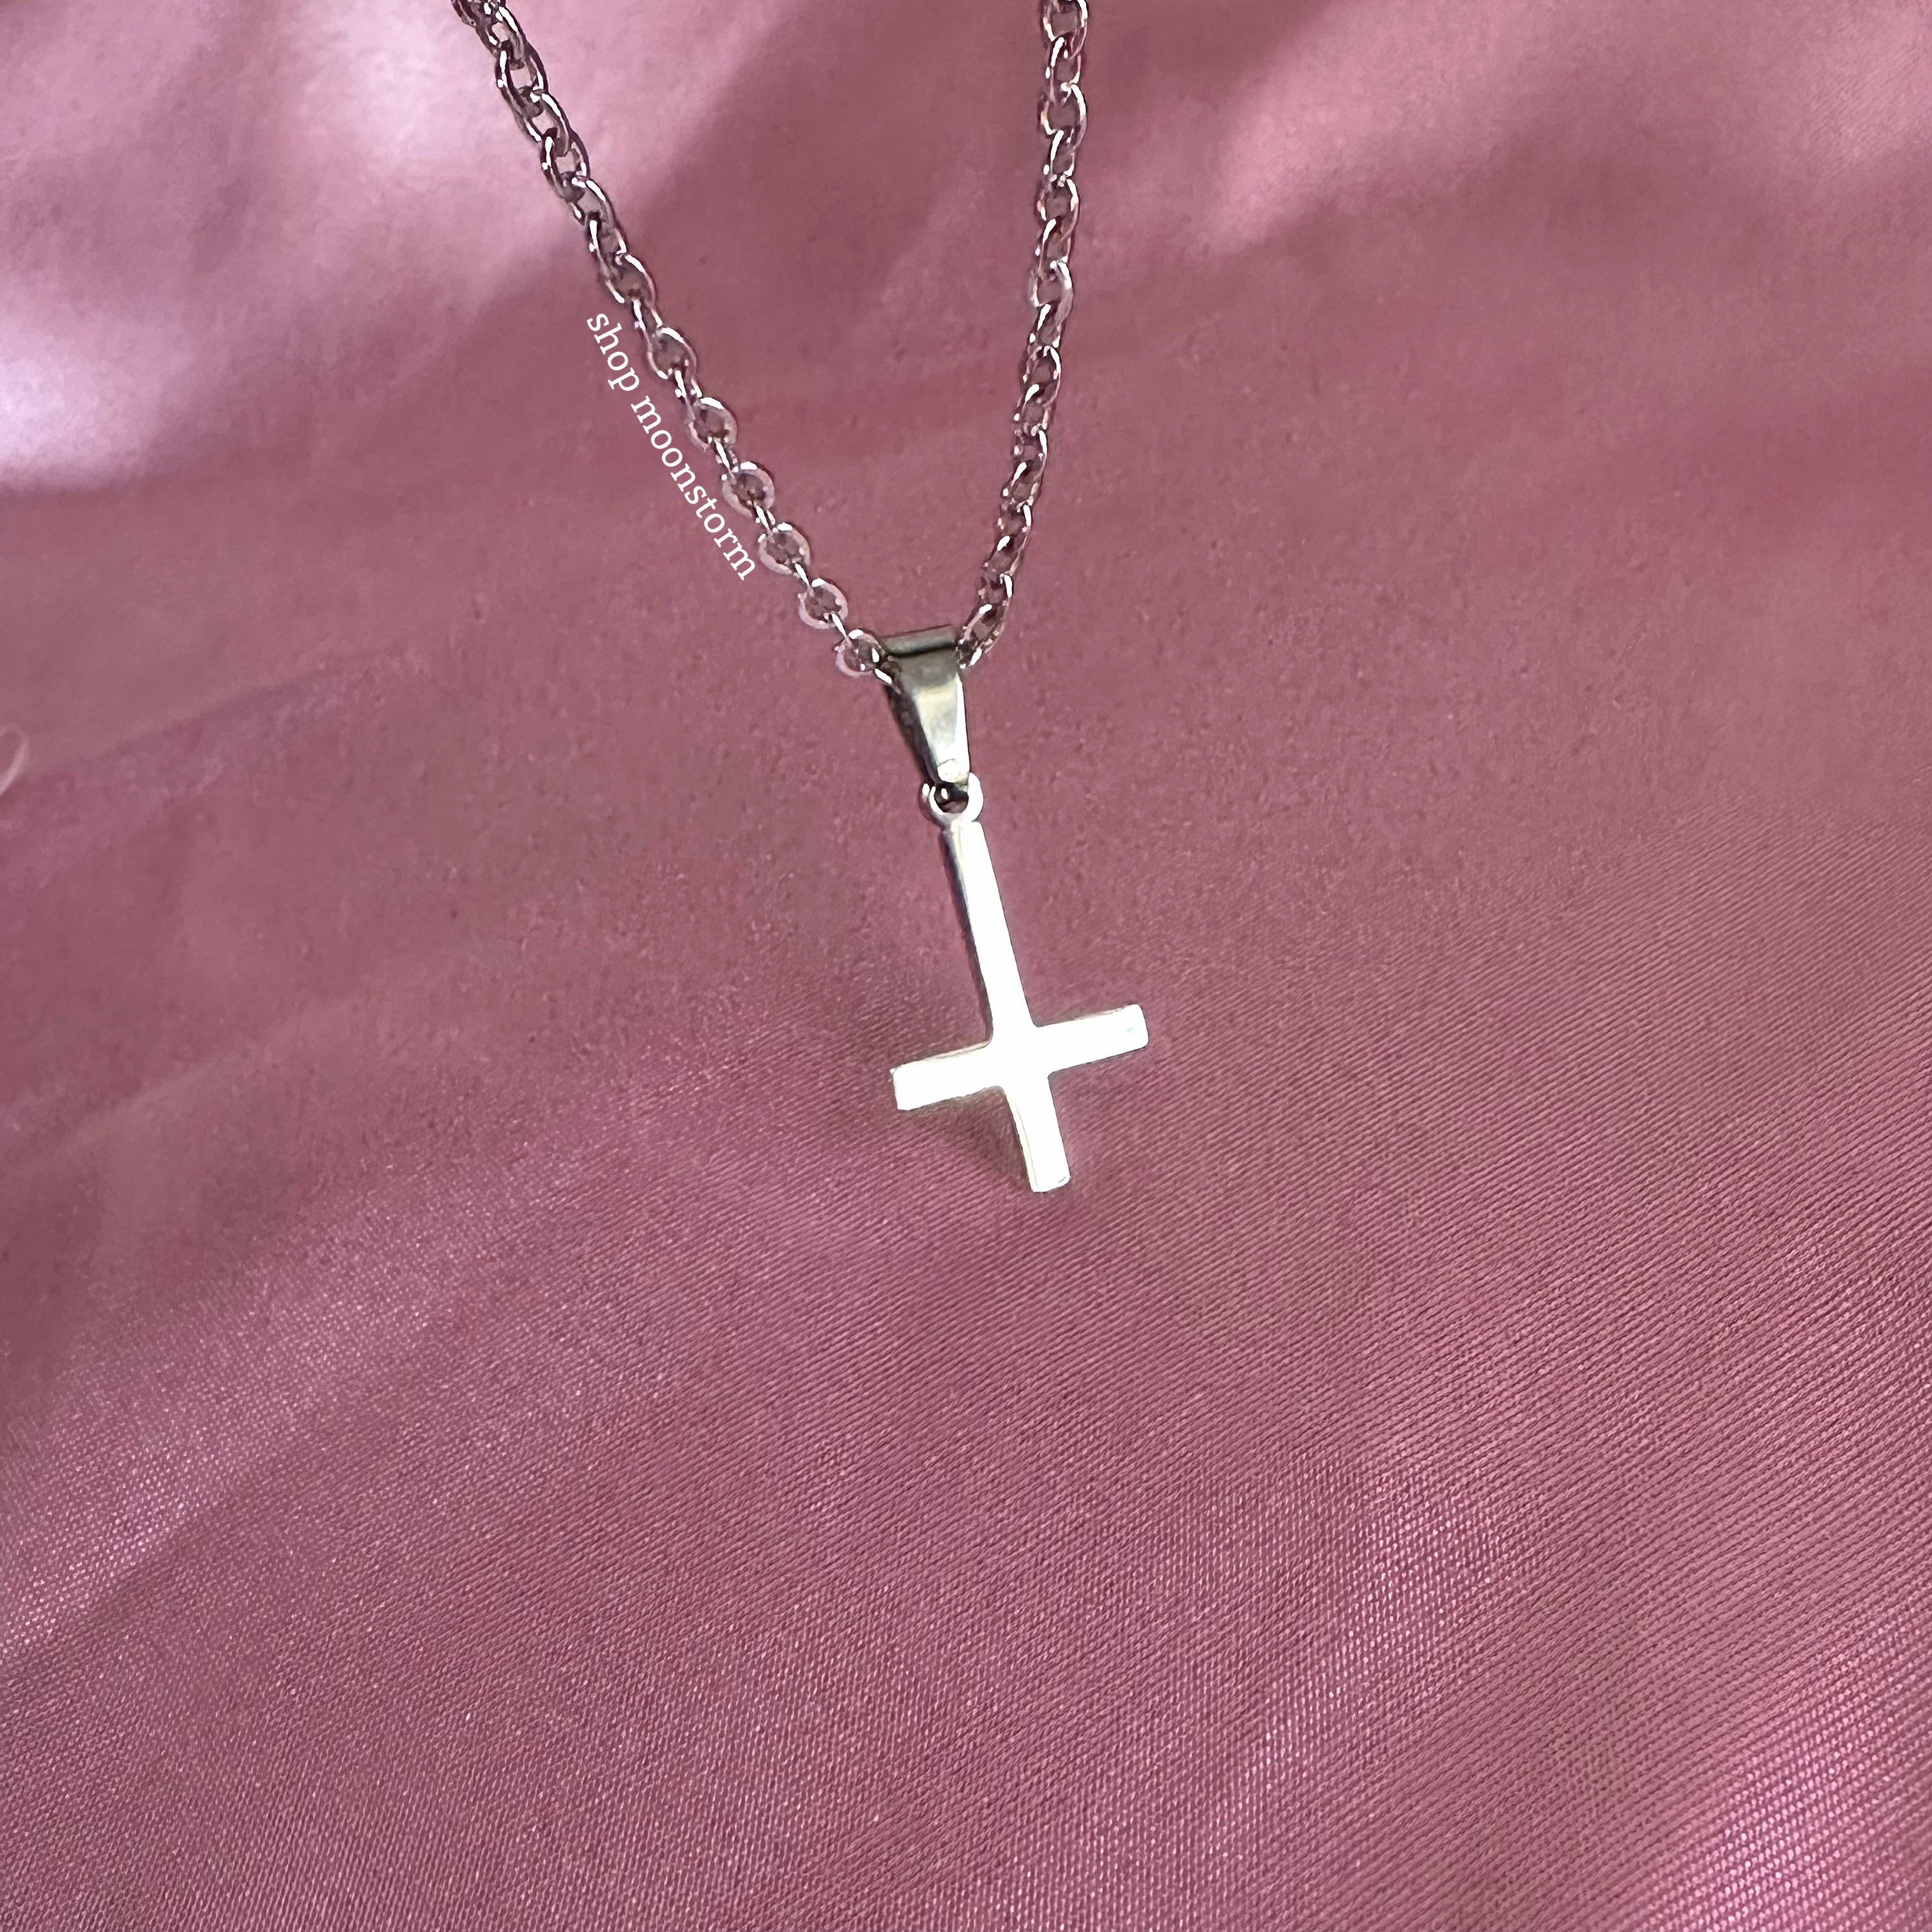 Fashion Mens Gifts Silver Cross Of St. Peter Upside Down Cross Pendant  Stainless Steel Catholic Necklace Box Chain 18 32 From 5,01 € | DHgate